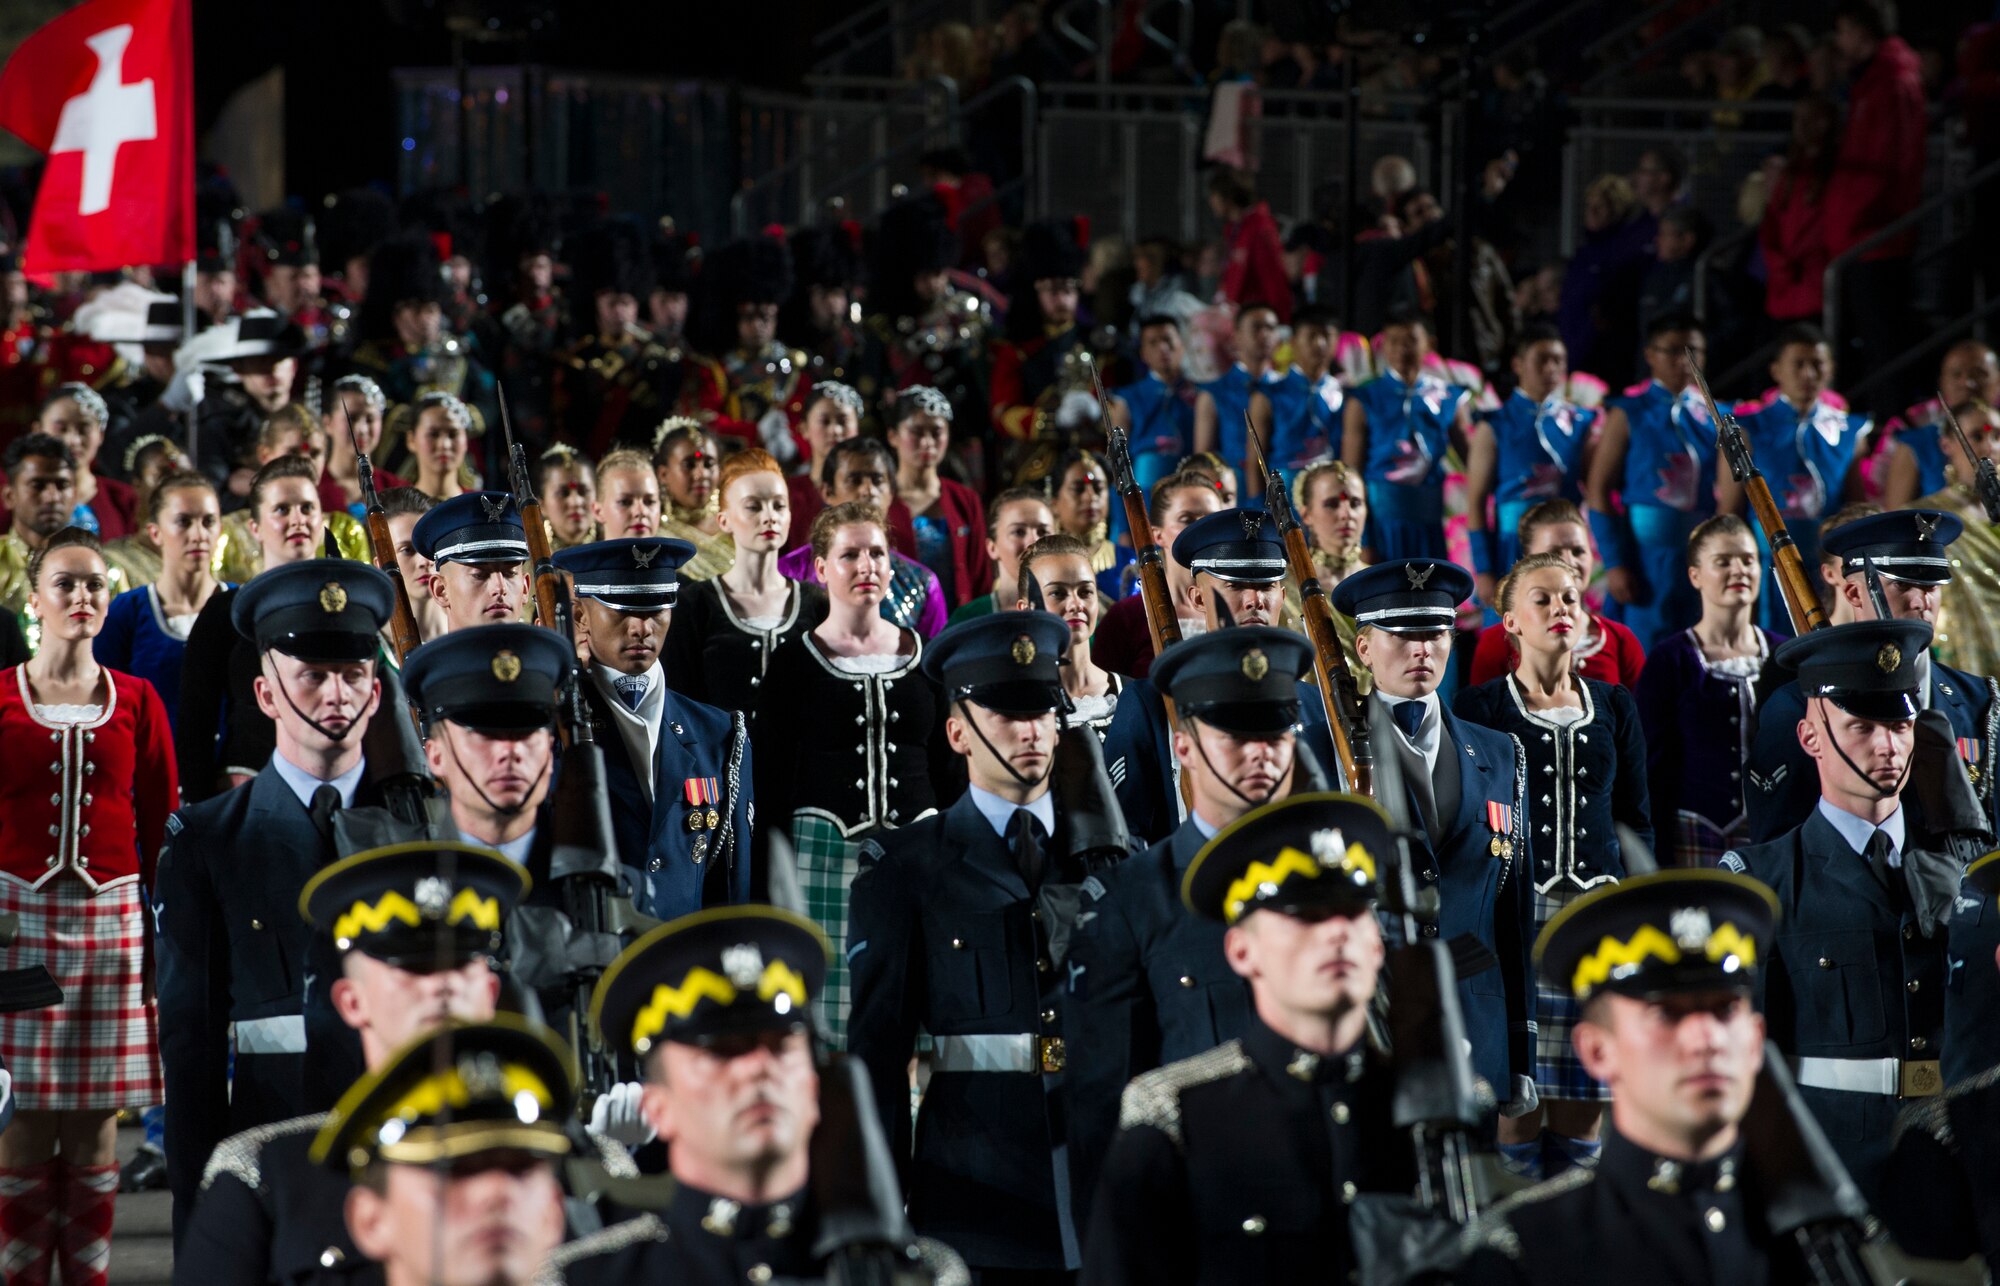 The United States Air Force Honor Guard Drill Team stands in formation after performing for thousands of people during The Royal Edinburgh Military Tattoo on the Esplanade of the Edinburgh Castle in Edinburgh, Scotland Aug. 6, 2015. The 66th production of the tattoo welcomes more than 220,000 spectators from around the world for more than 3 weeks. The event includes 17 acts for 25 performances and welcomes more than 1,390 performers from the US, Europe, Asia, Australia and Canada. The show features Bollywood dancers from India, the Military Band of the People’s Liberation Army of China, the Top Secret Drum Corps from Switzerland, the Royal Air Force and Queen’s Colour Squadron Mass Band and more. (U.S. Air Force photo/Staff Sgt. Nichelle Anderson/Released)